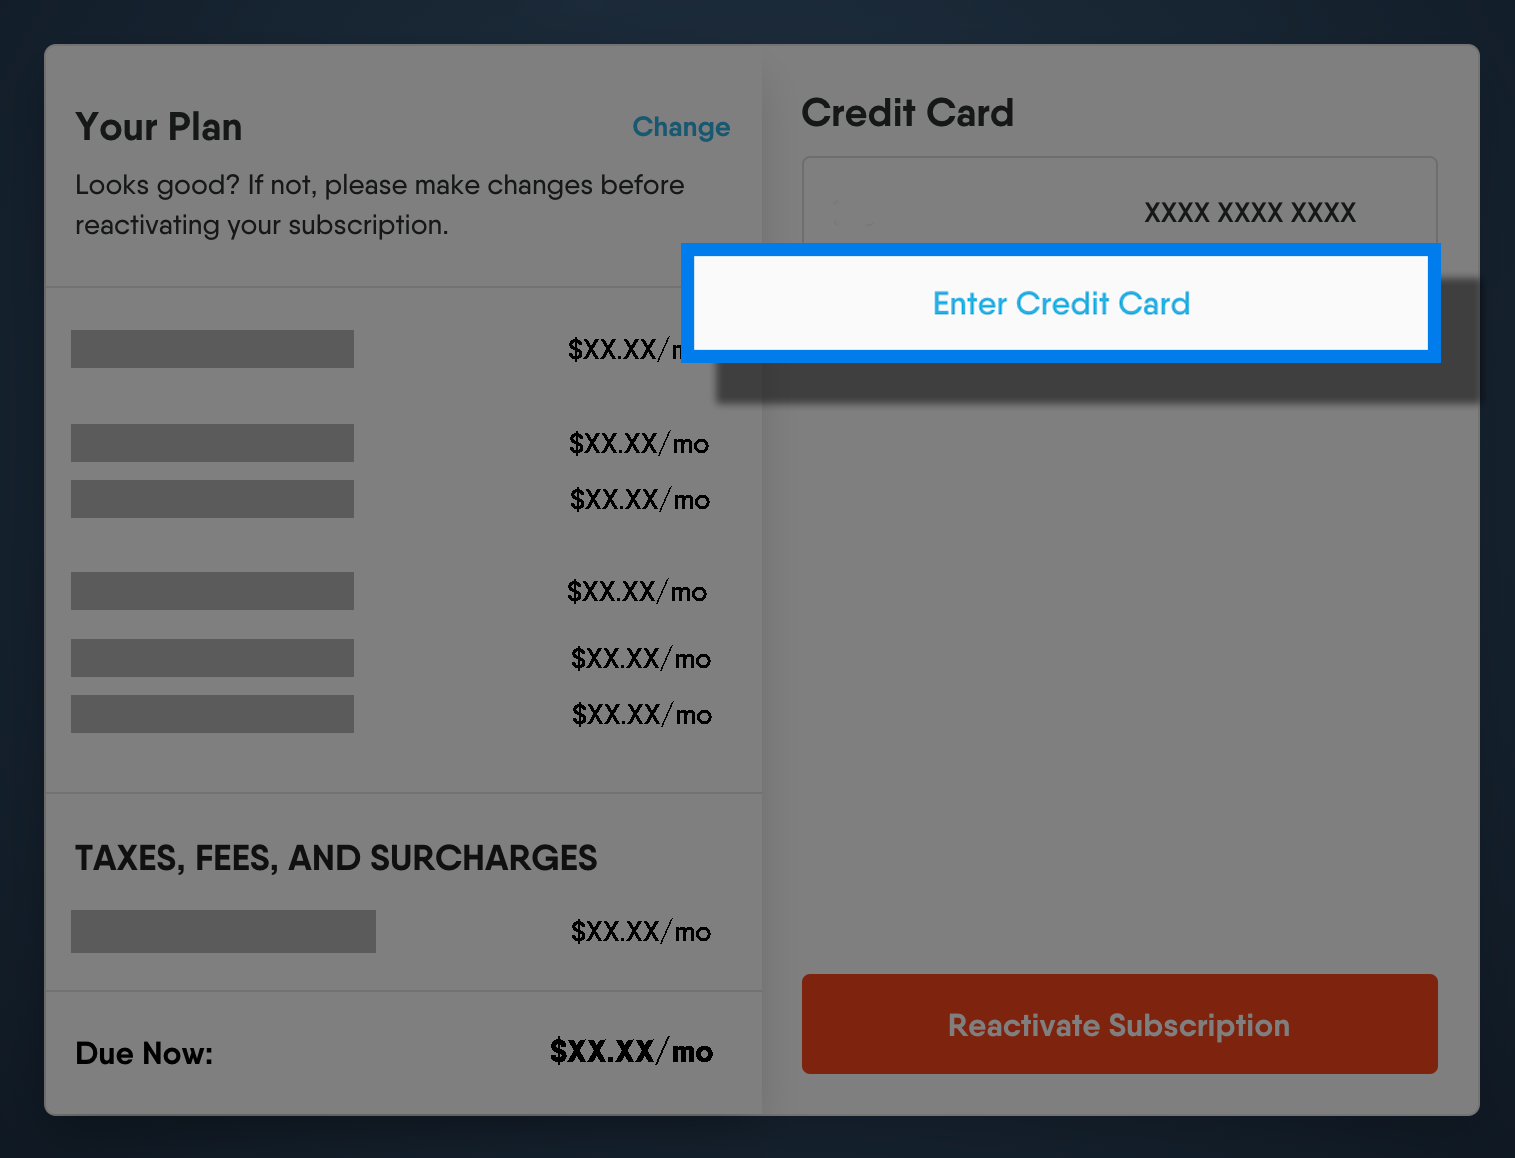 YOUR PLAN overview with ENTER CREDIT CARD highlighted; go here to add a new payment method